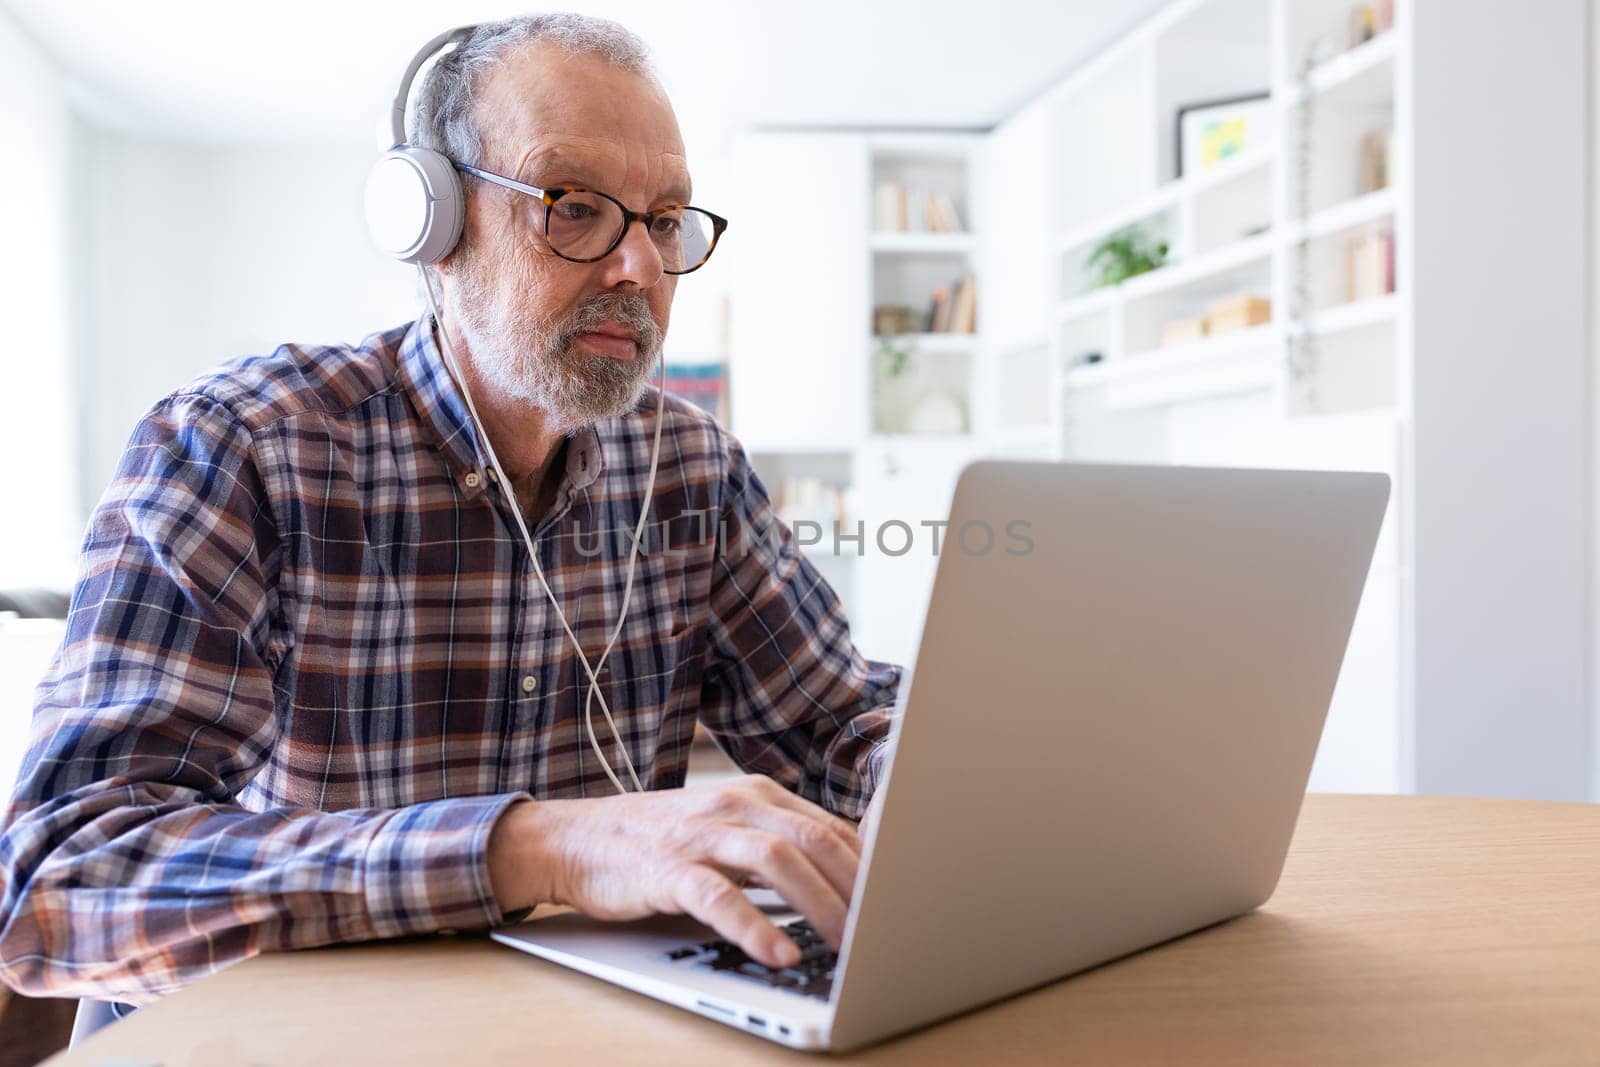 Senior man working with laptop and using headphones at home dining room. Lifestyle and technology concepts.